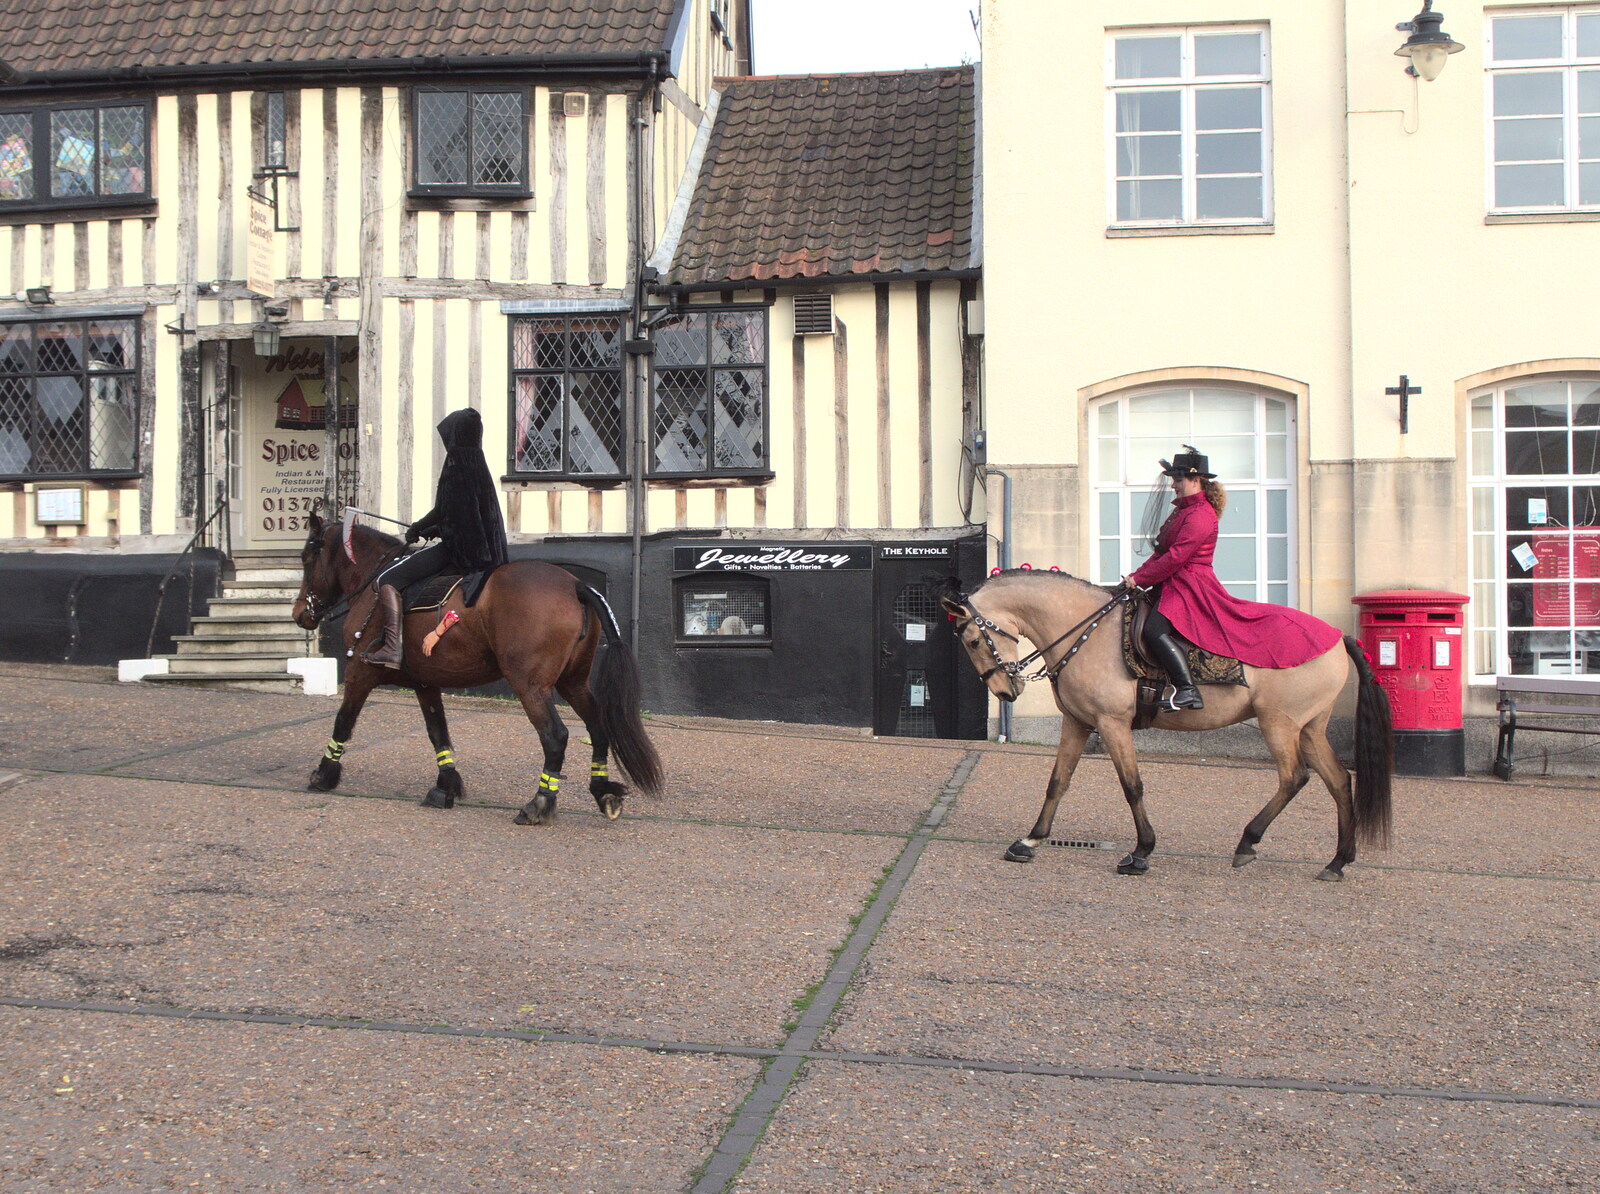 Pizza and Pasta in Bury St. Edmunds, Suffolk - 30th October 2022: The Grim Reaper on horseback in Diss